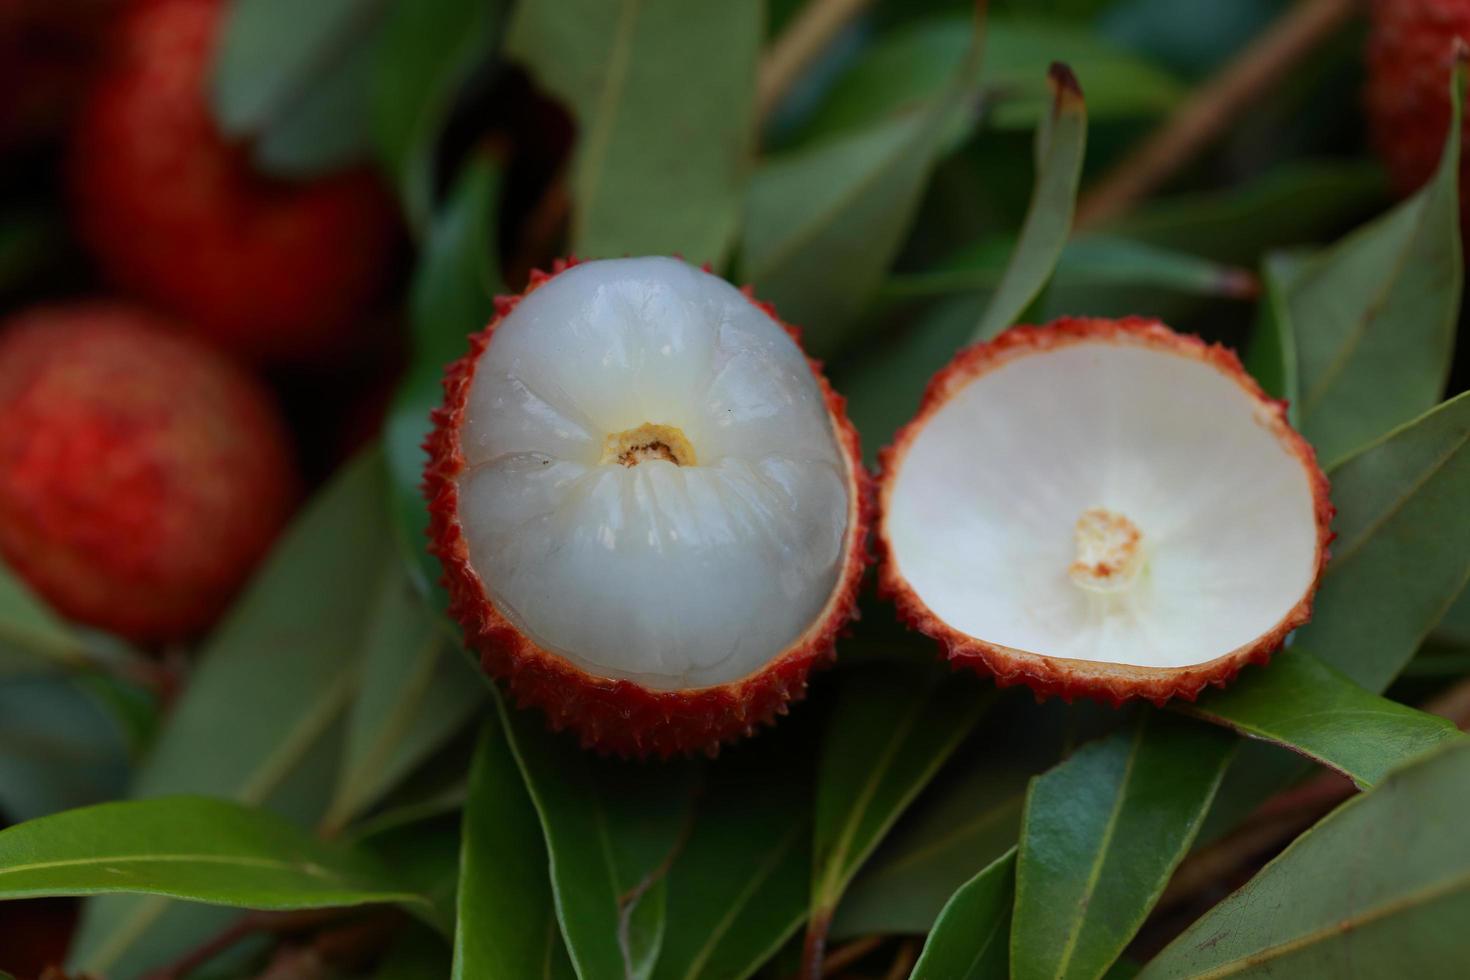 Lychee, Fresh lychee and peeled showing the red skin and white flesh with green leaf . photo